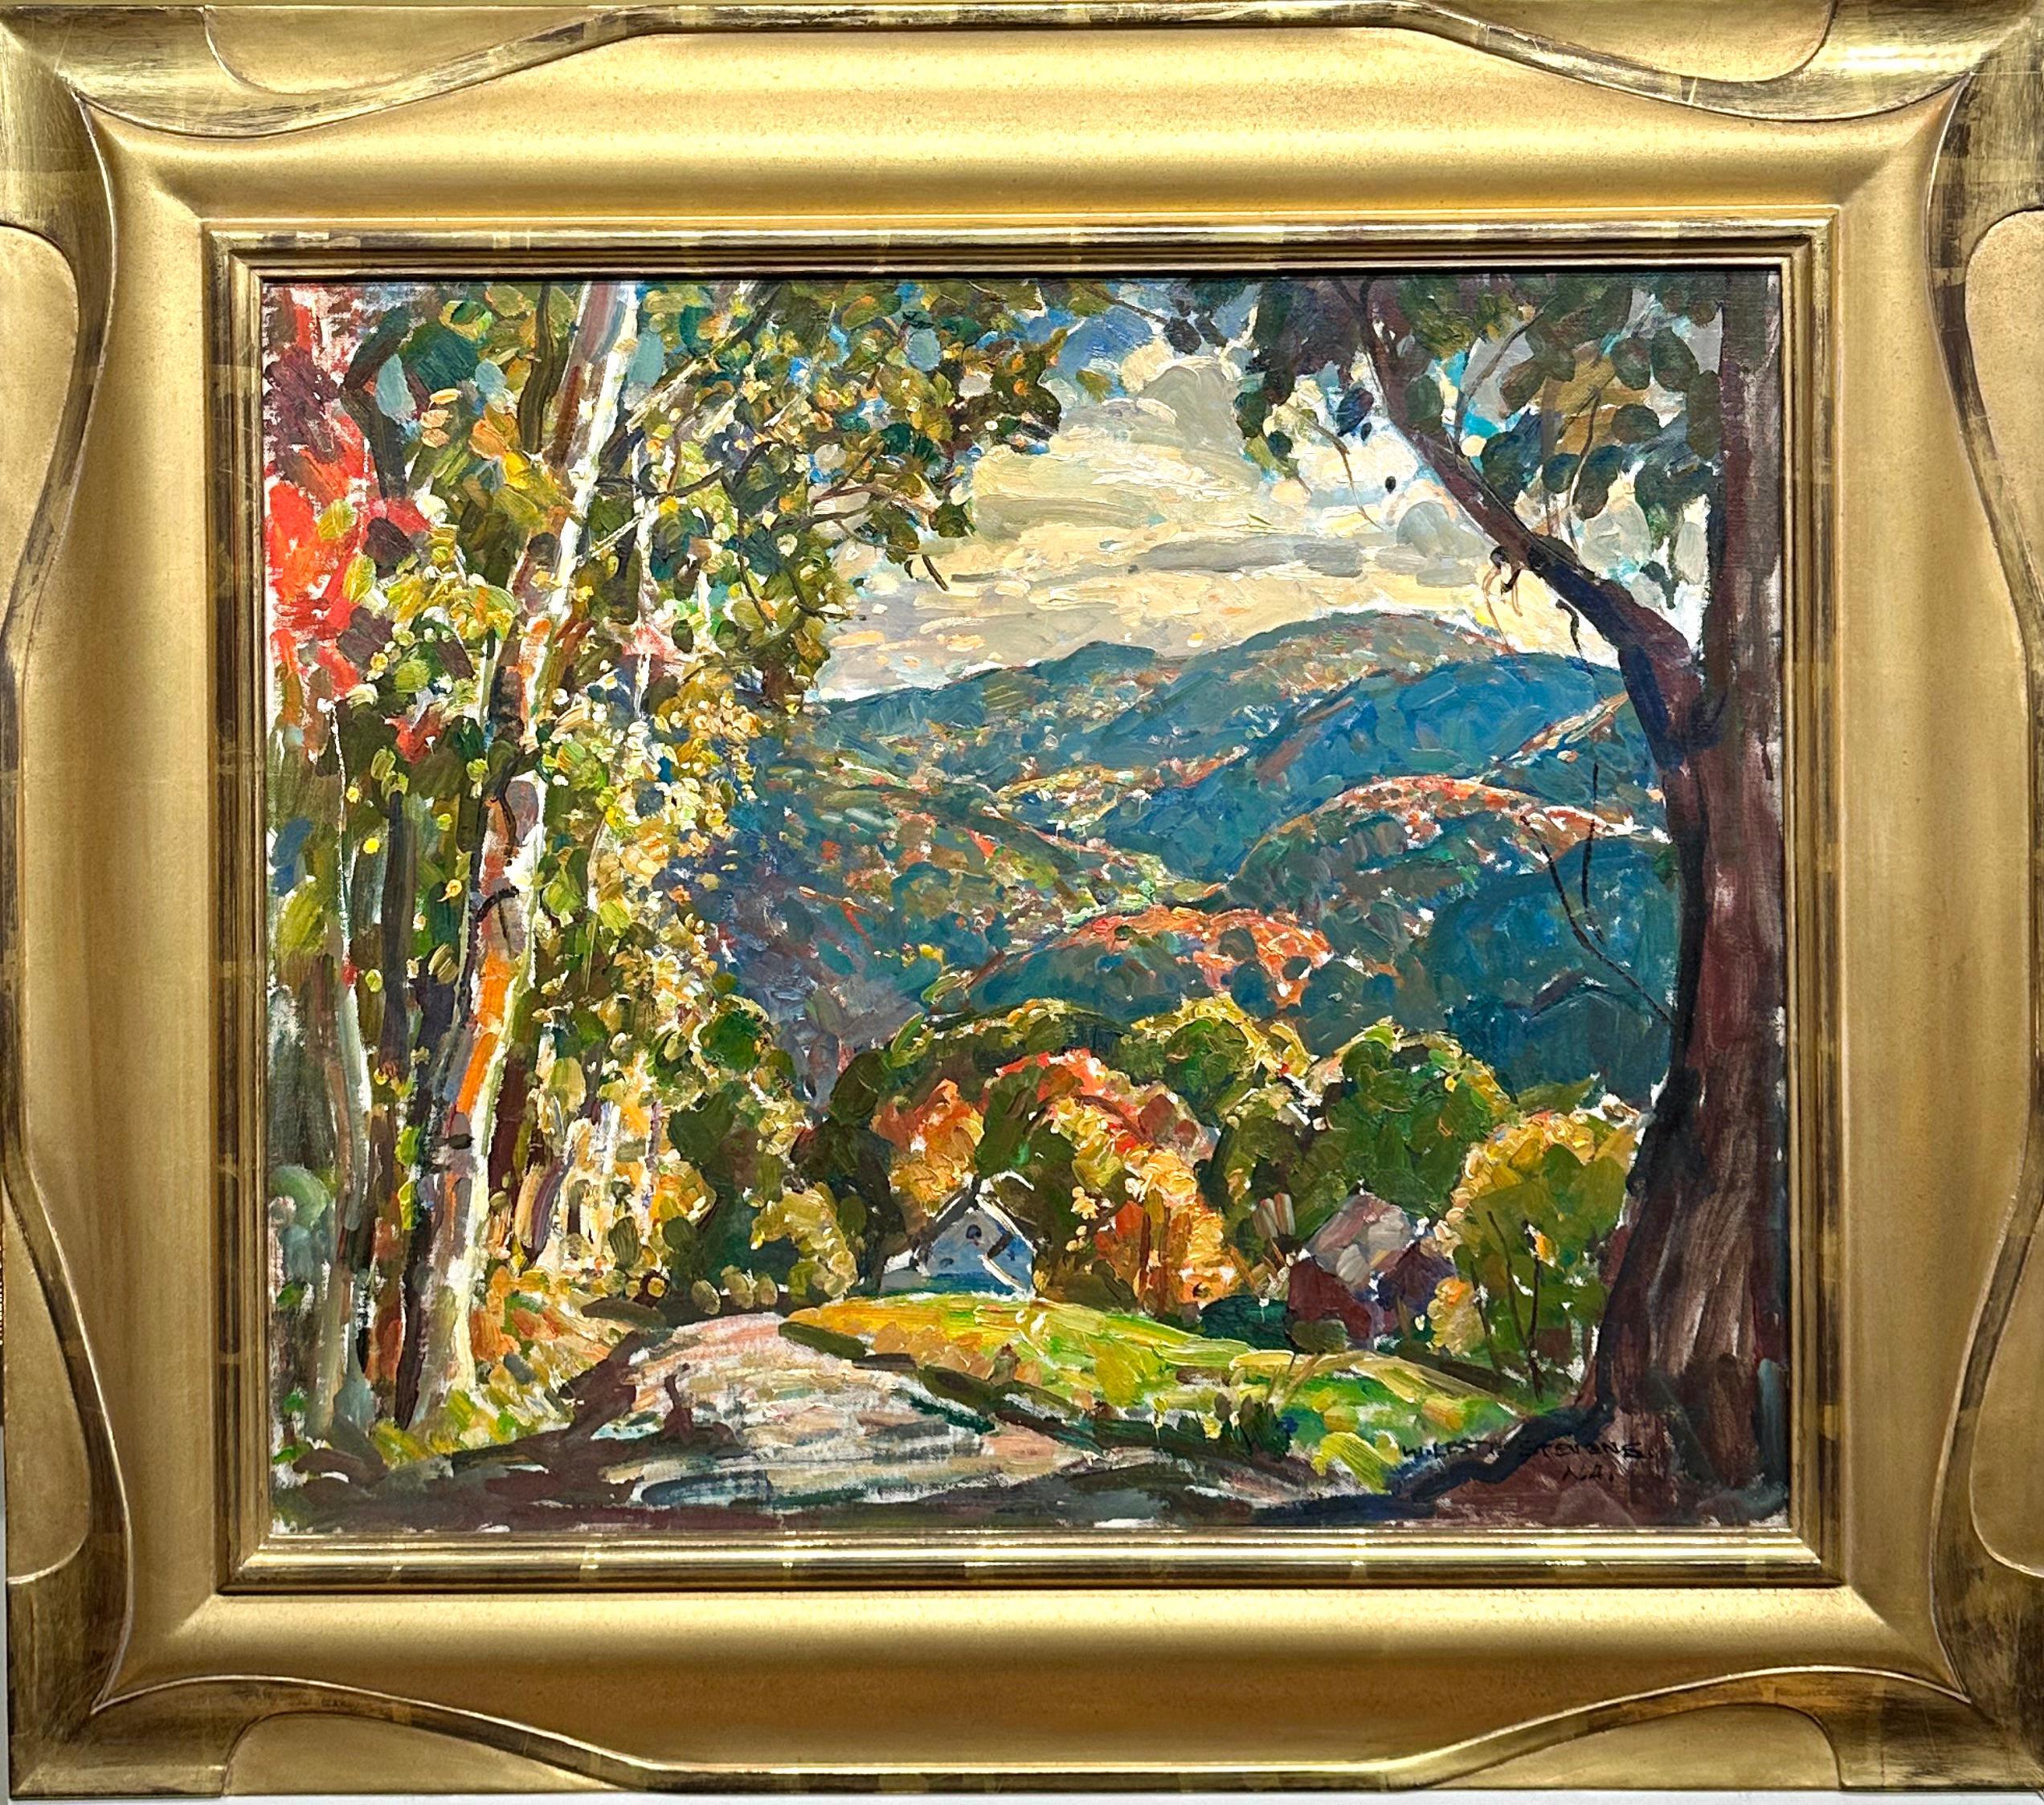 William Lester Stevens Landscape Painting - "Autumn in the Valley" - Landscape painting, Colorful, Historic Rockport Artist